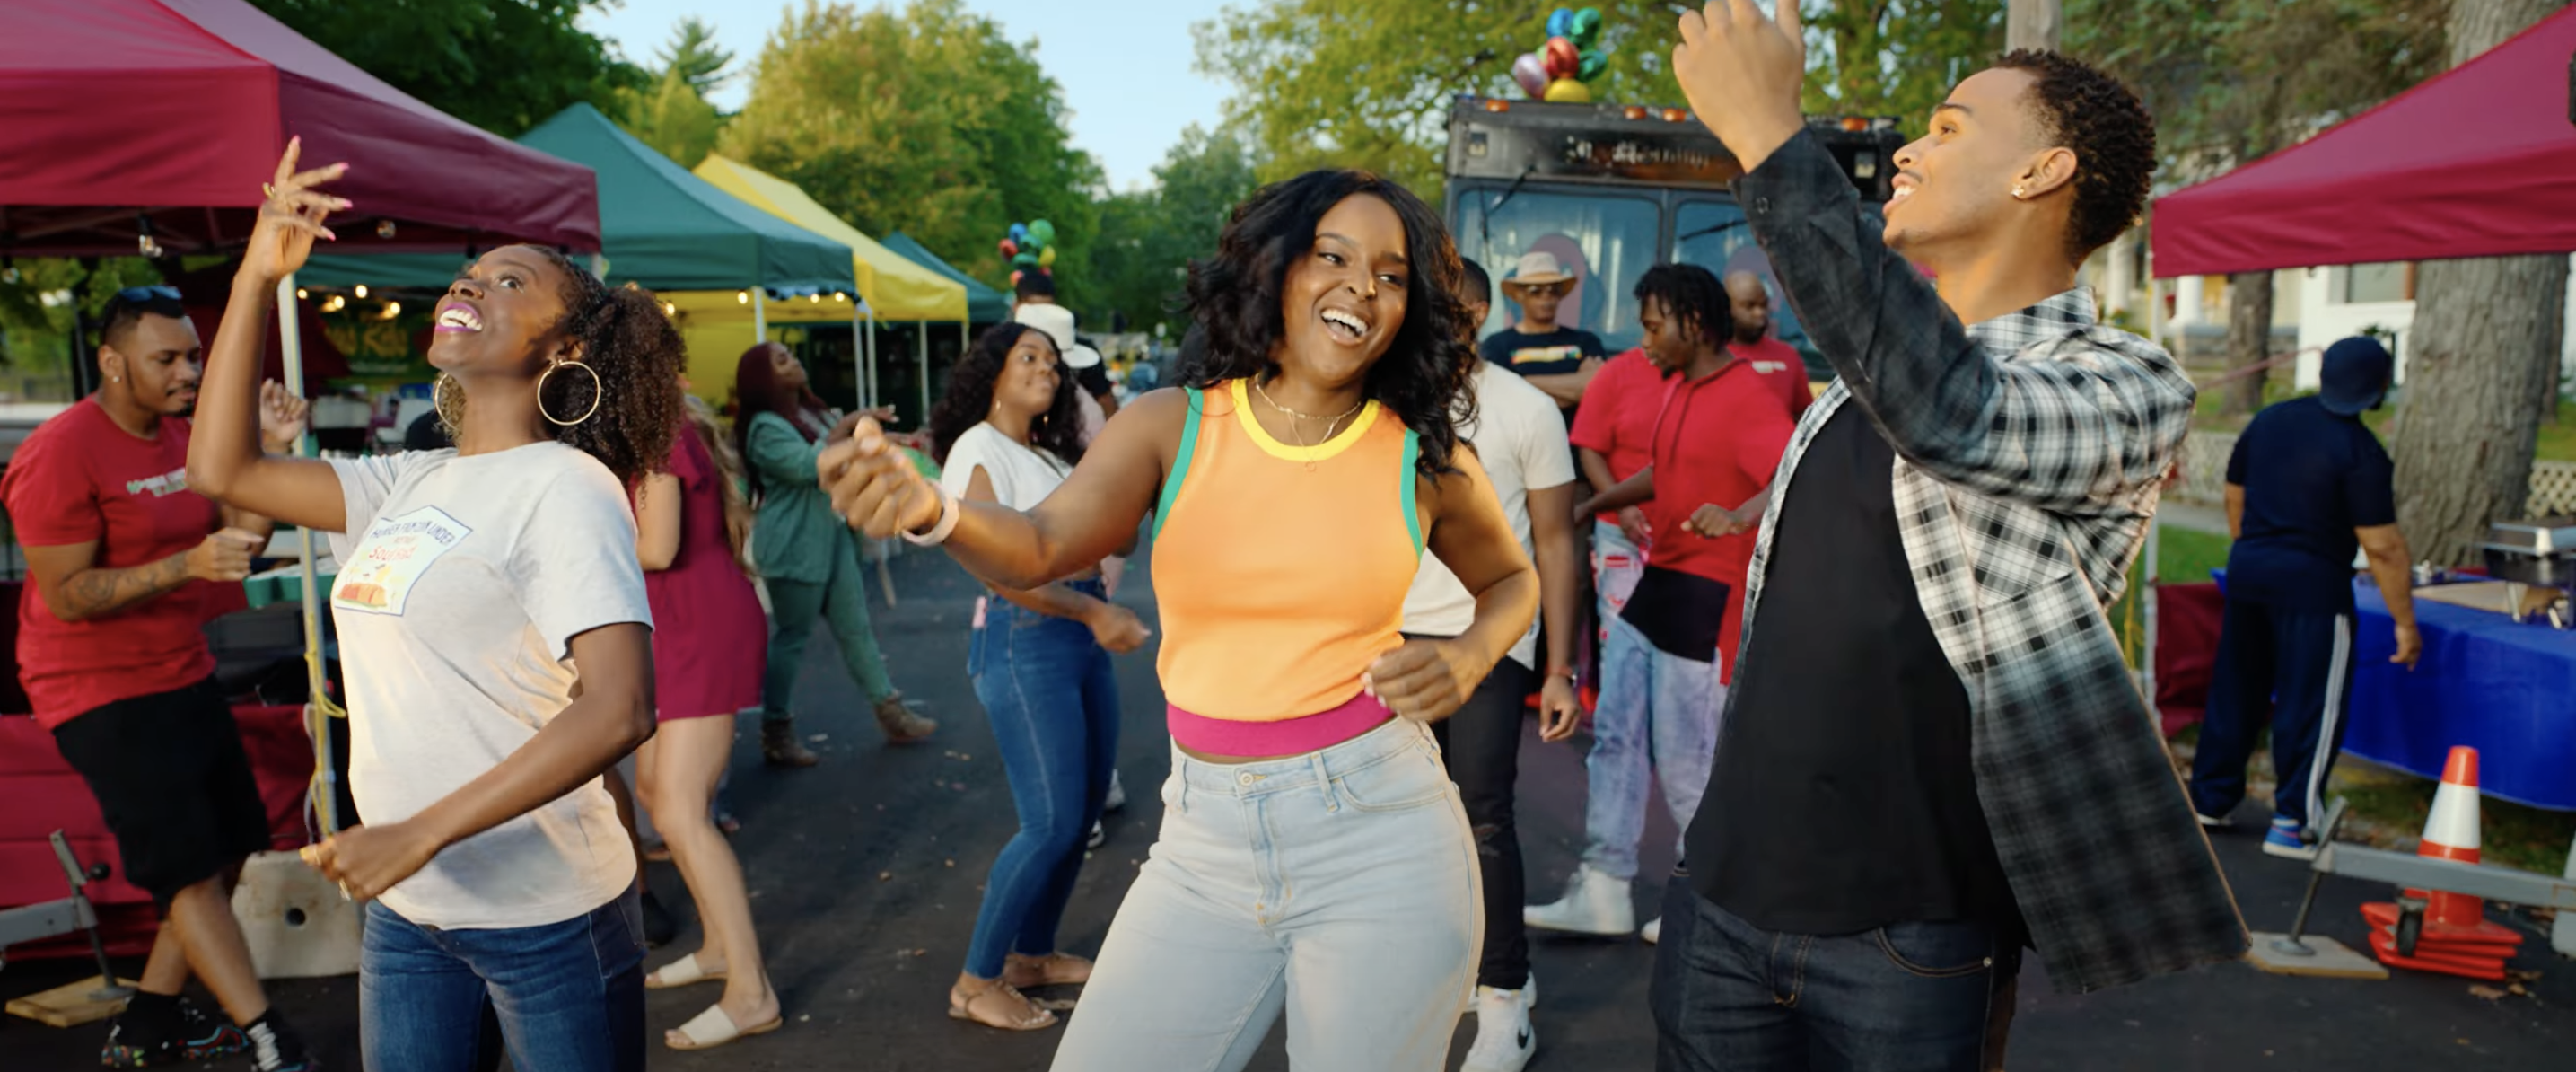 three friends dancing at a block party